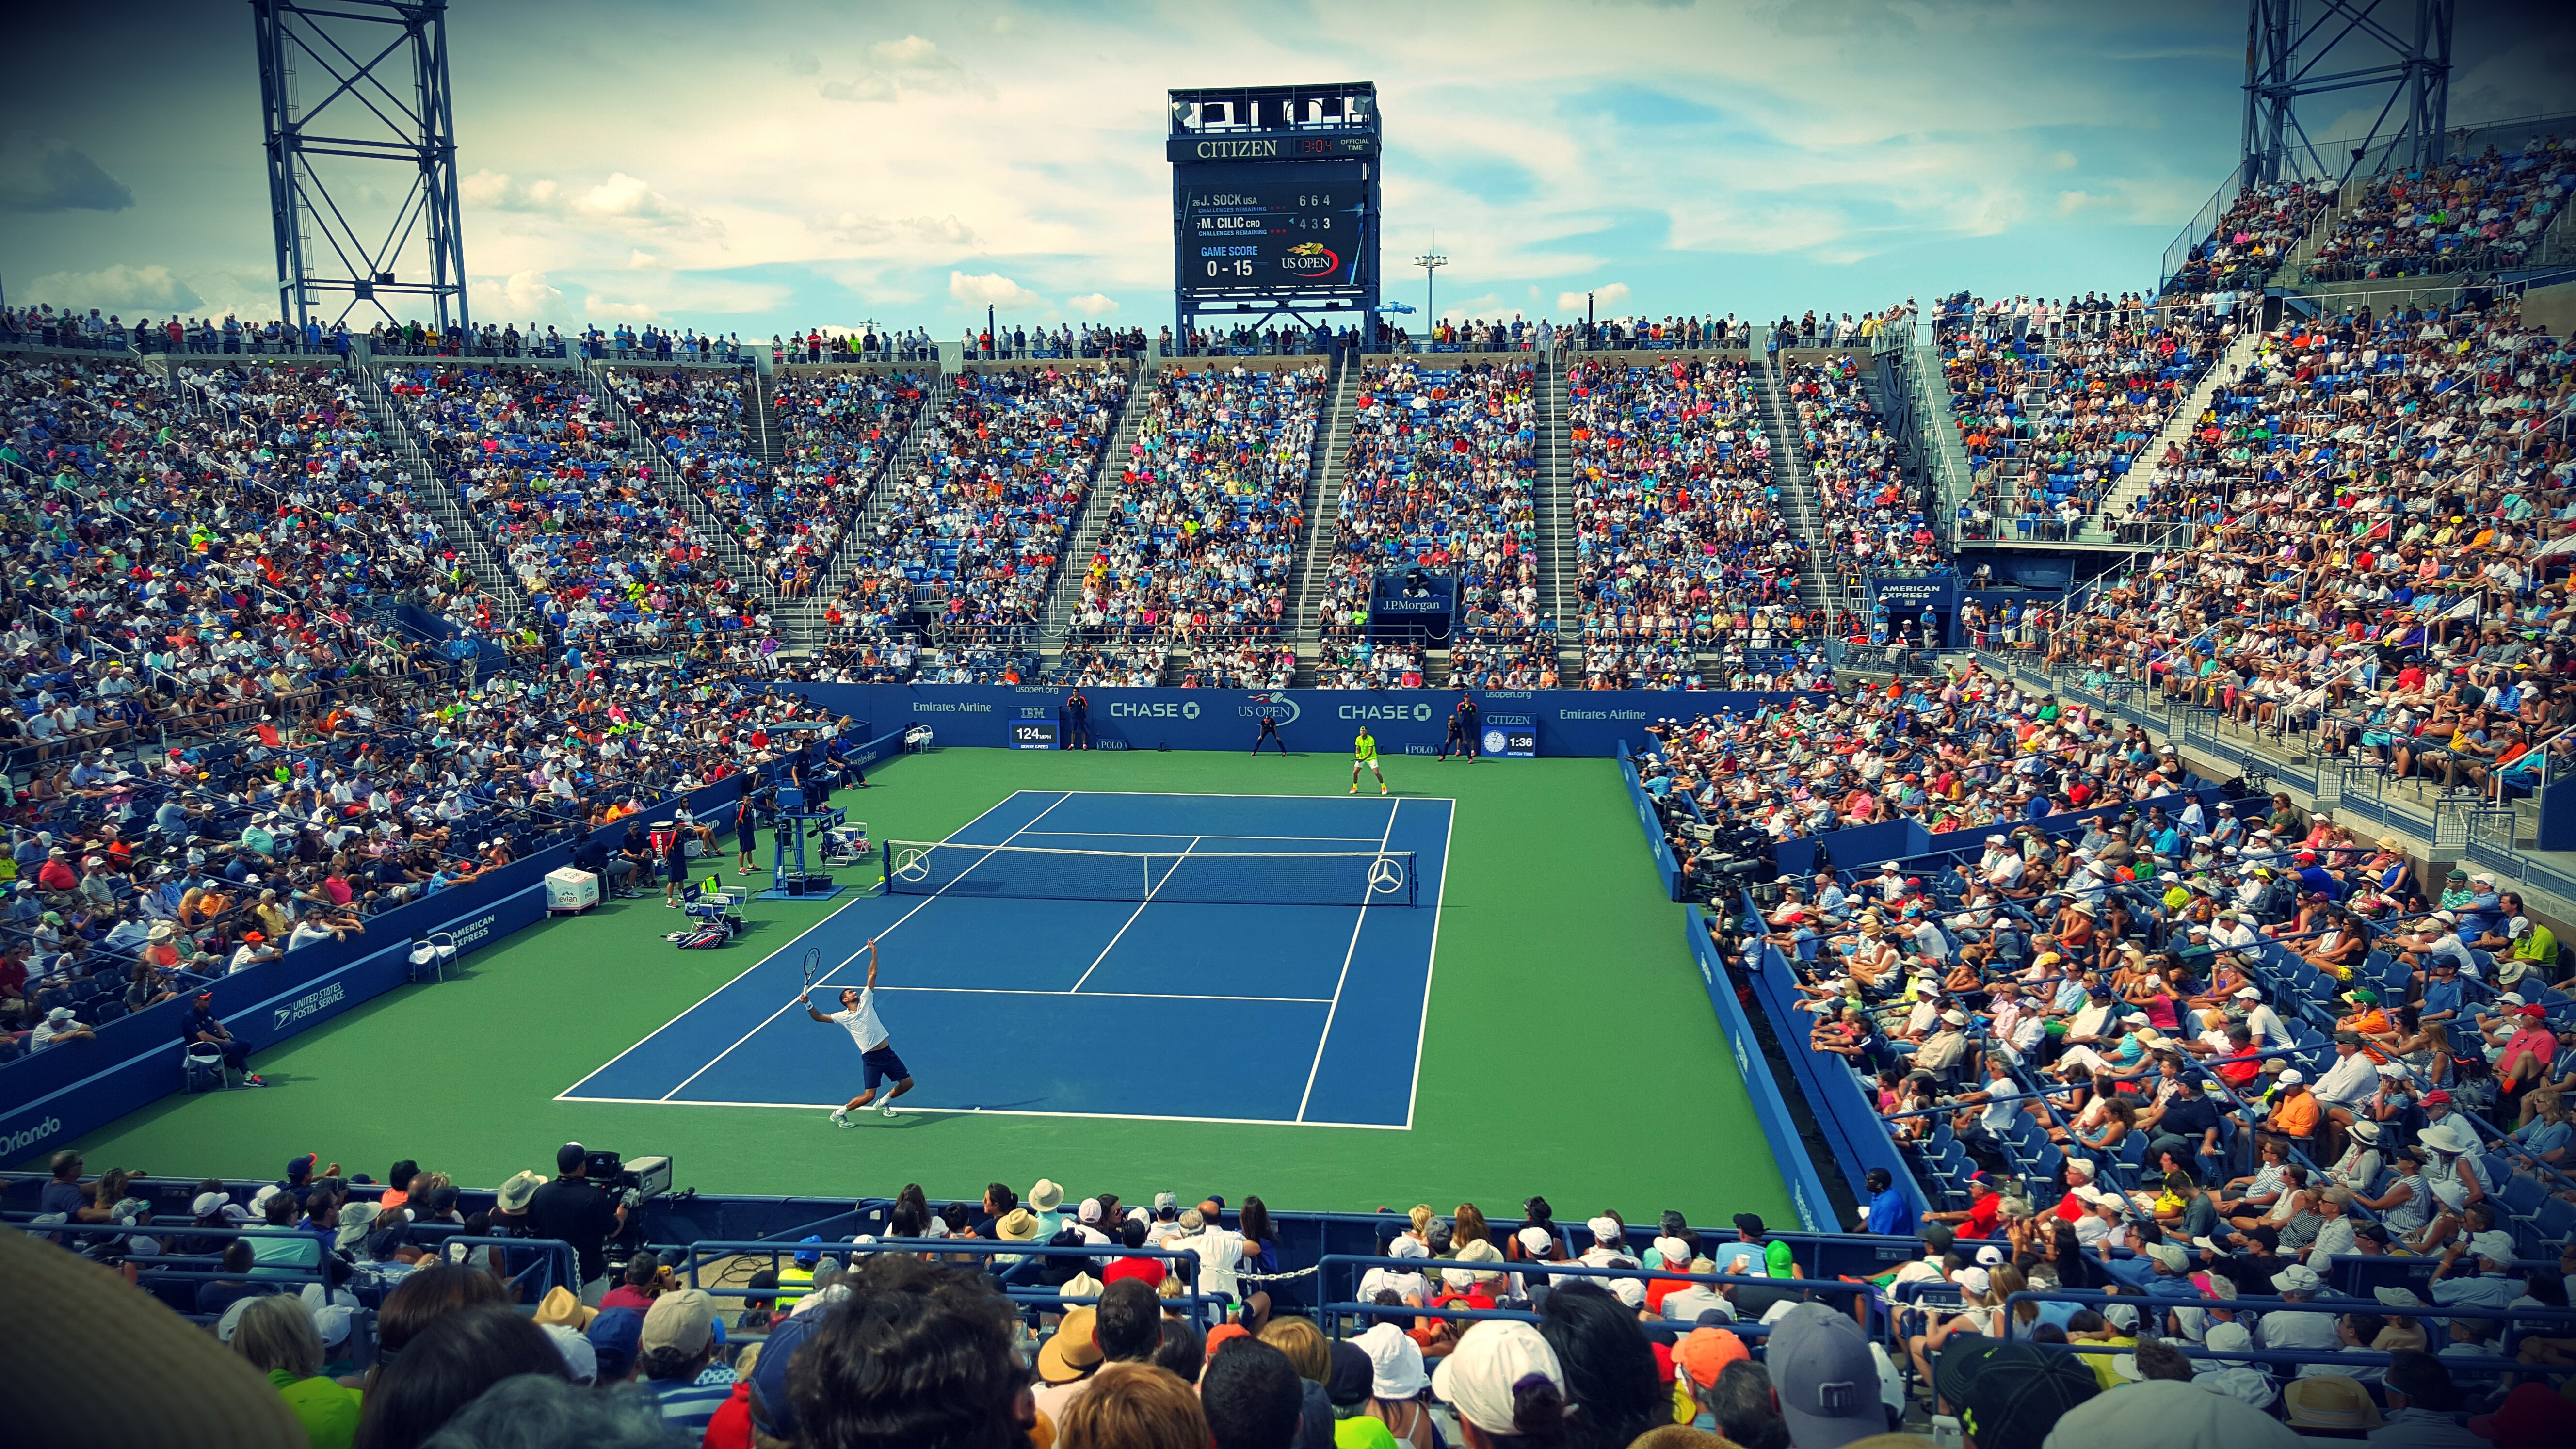 People Sitting on Bench Watching Tennis Event on Field during Daytime, Athletes, Tennis court, Tennis, Stadium, HQ Photo